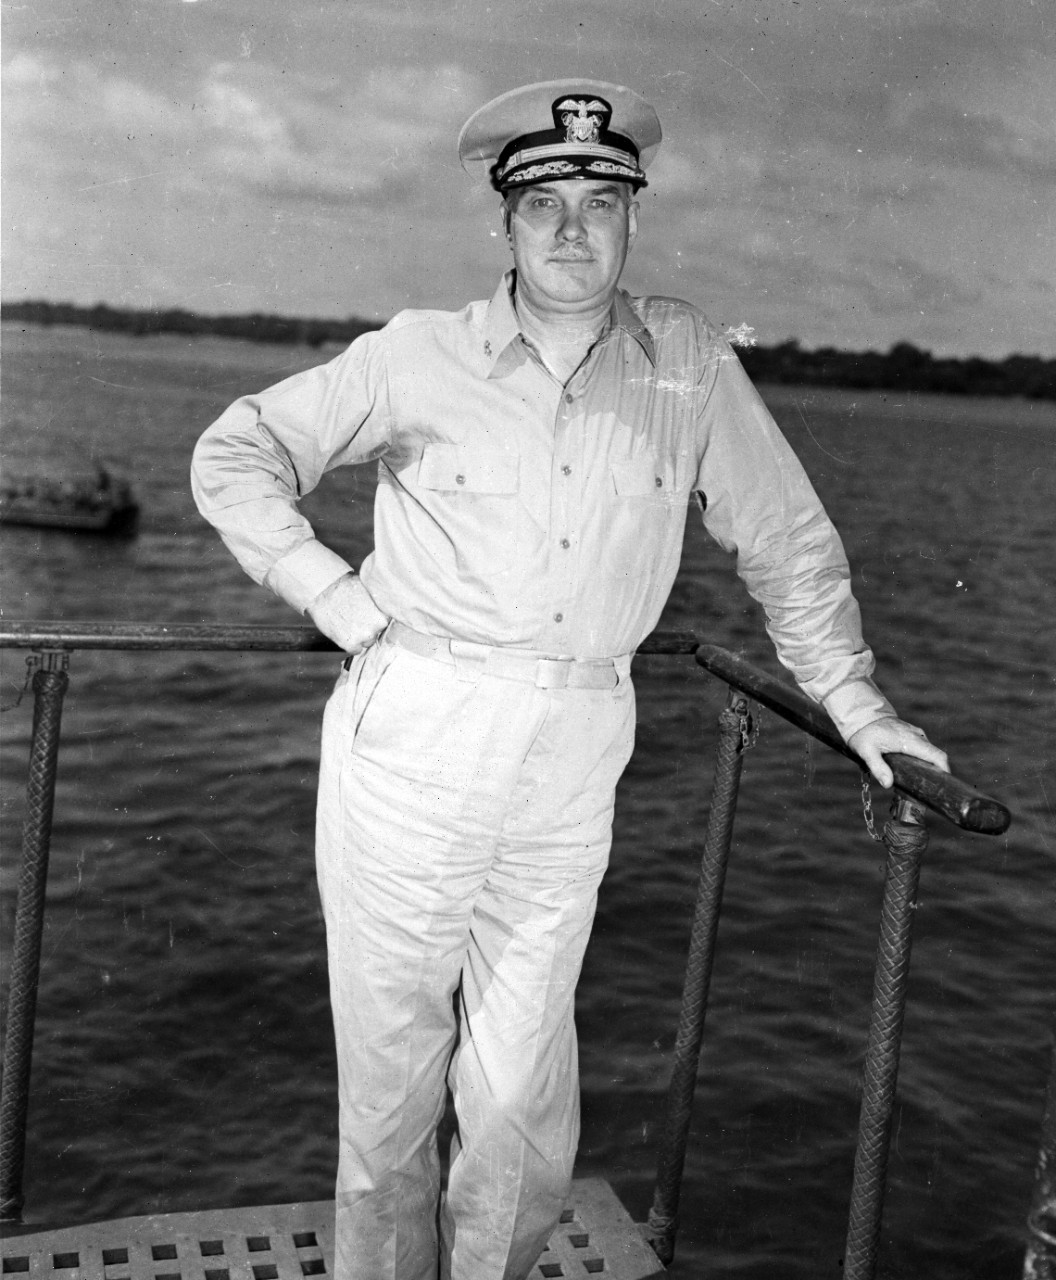 VADM W.L. Ainsworth - unknown date and location.